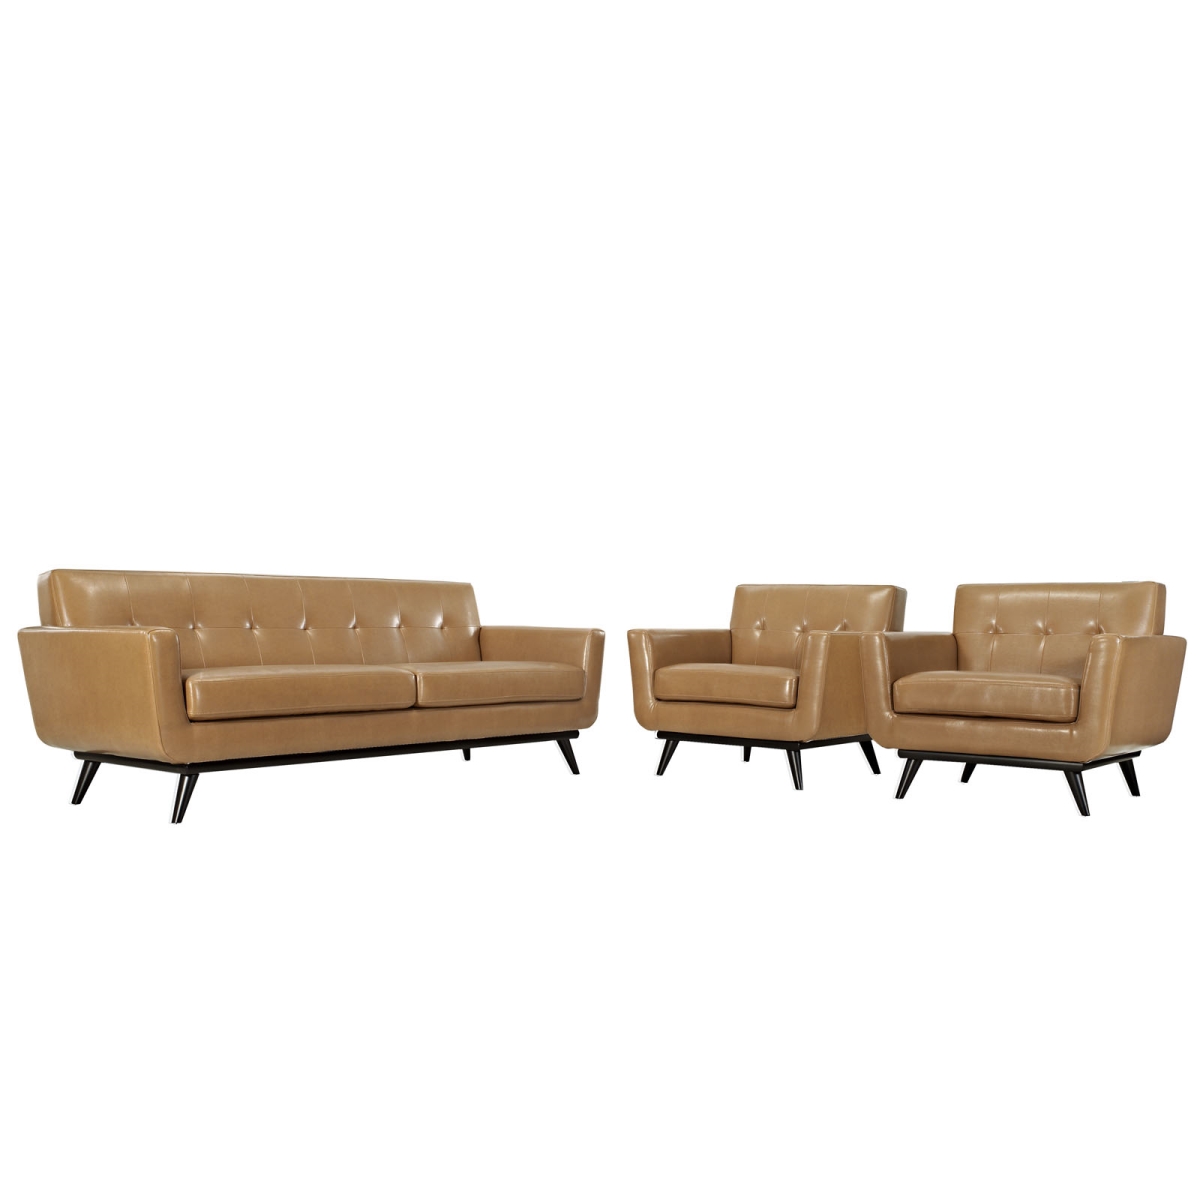 Eastend Eei-1763-tan-set Engage Sofa & 2 Armchair Set In Tan Leather With Wood Legs